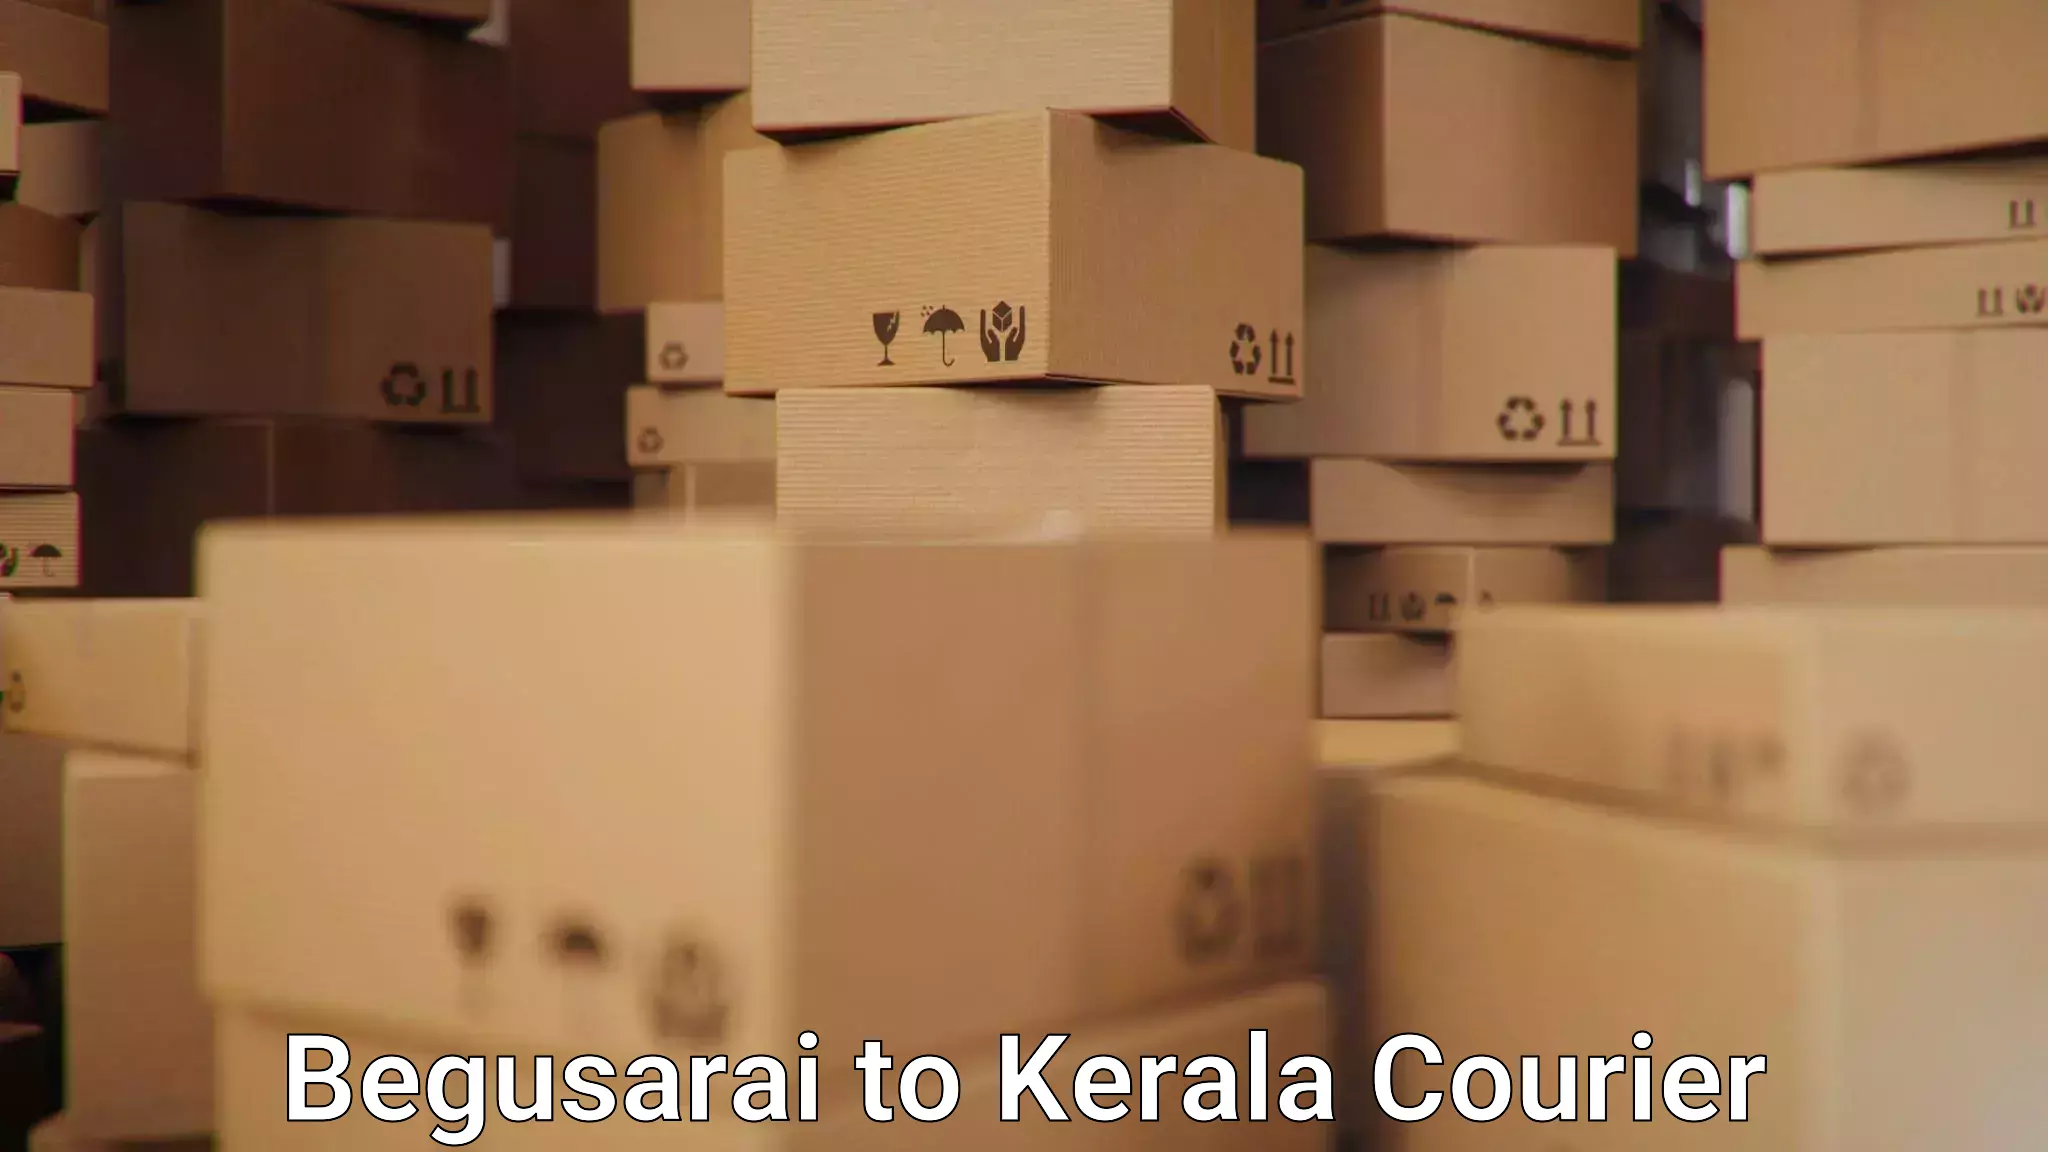 User-friendly delivery service Begusarai to Kerala